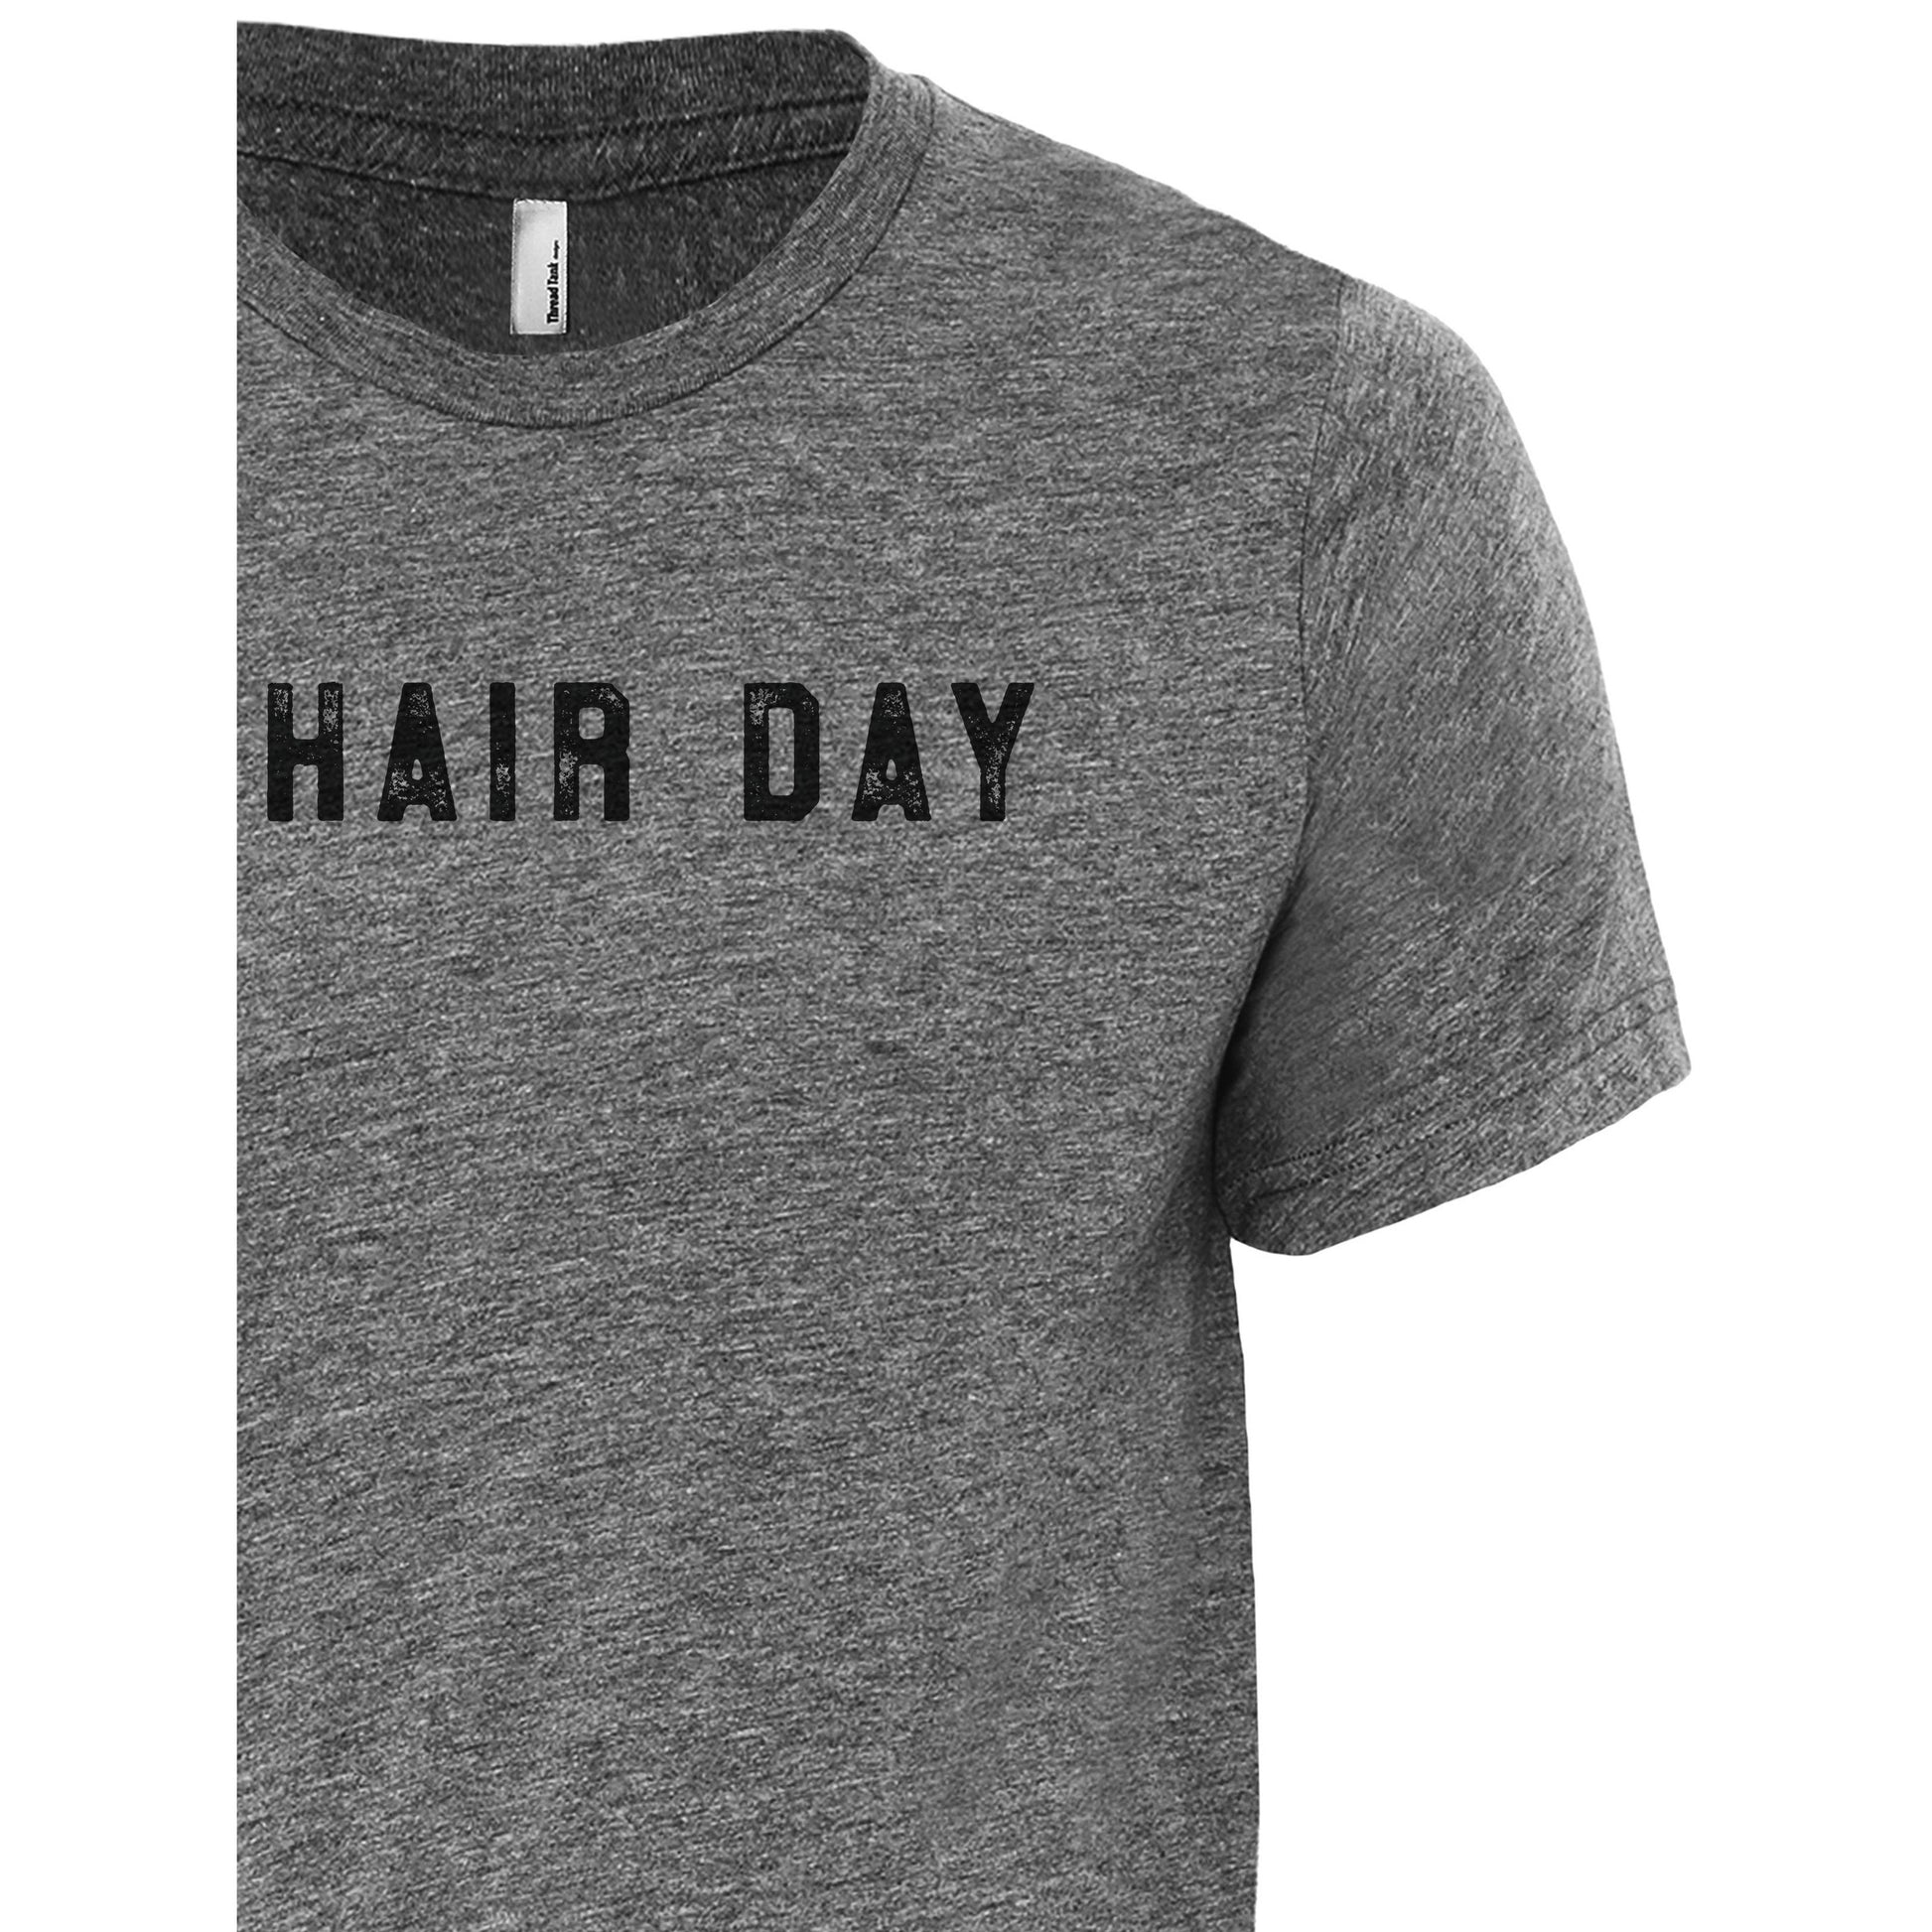 No Hair Day - Stories You Can Wear by Thread Tank